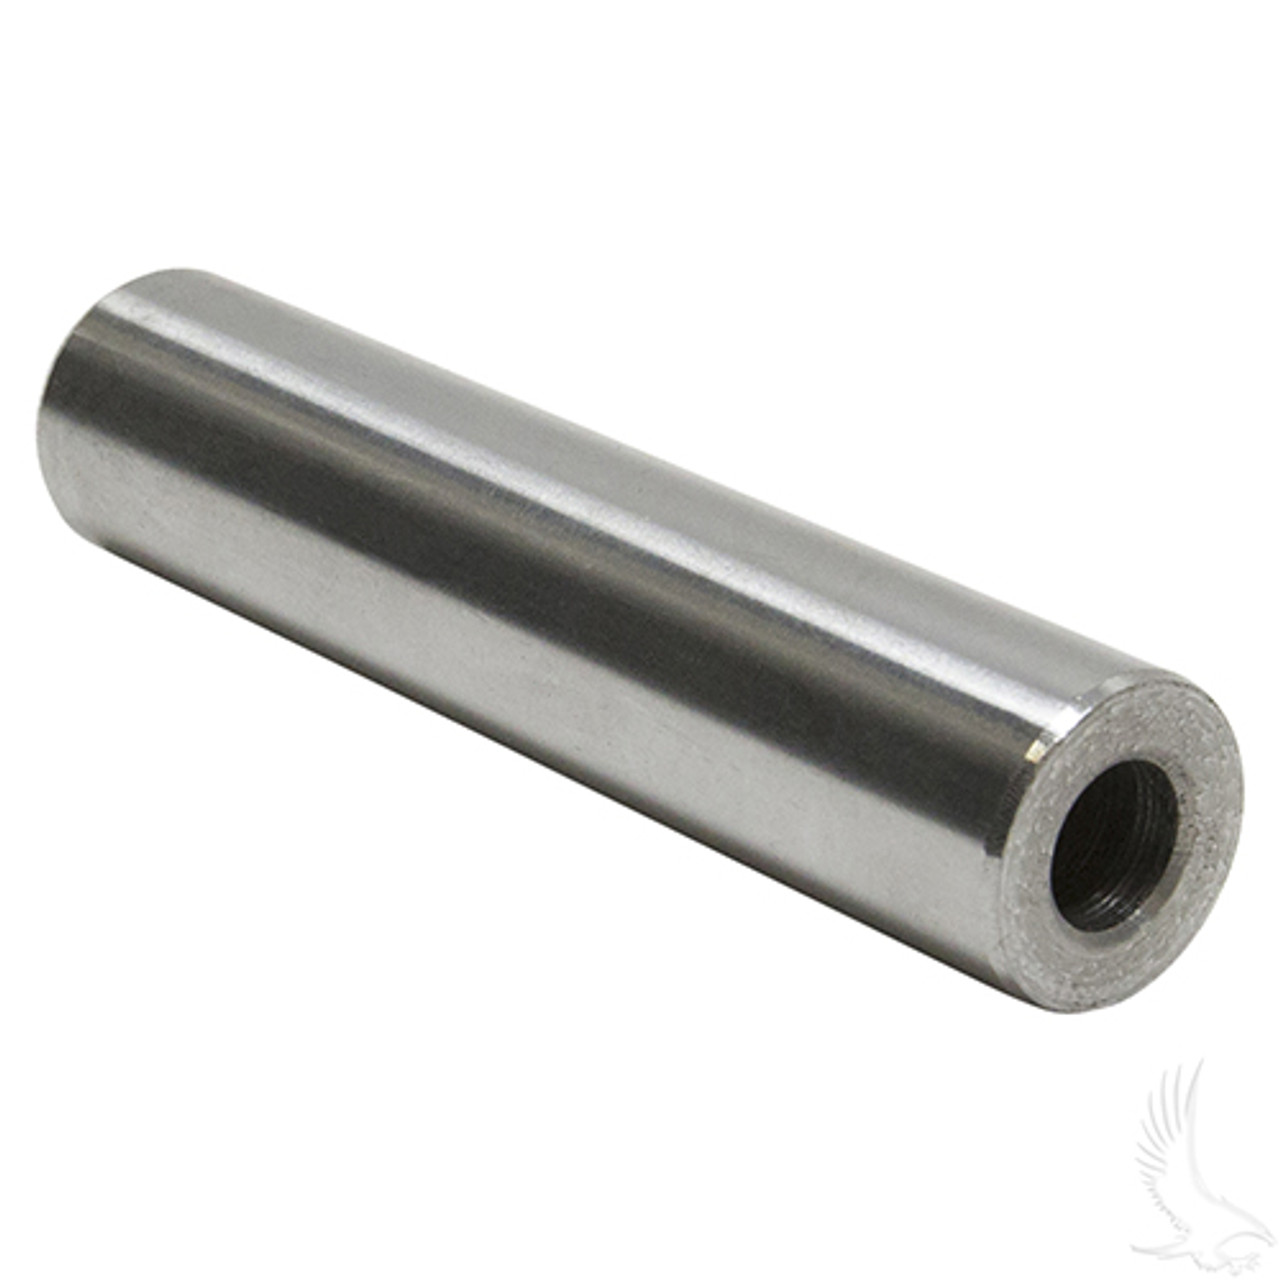 King Pin Tube for E-Z-GO RXV 2008-Up, AXL-0027